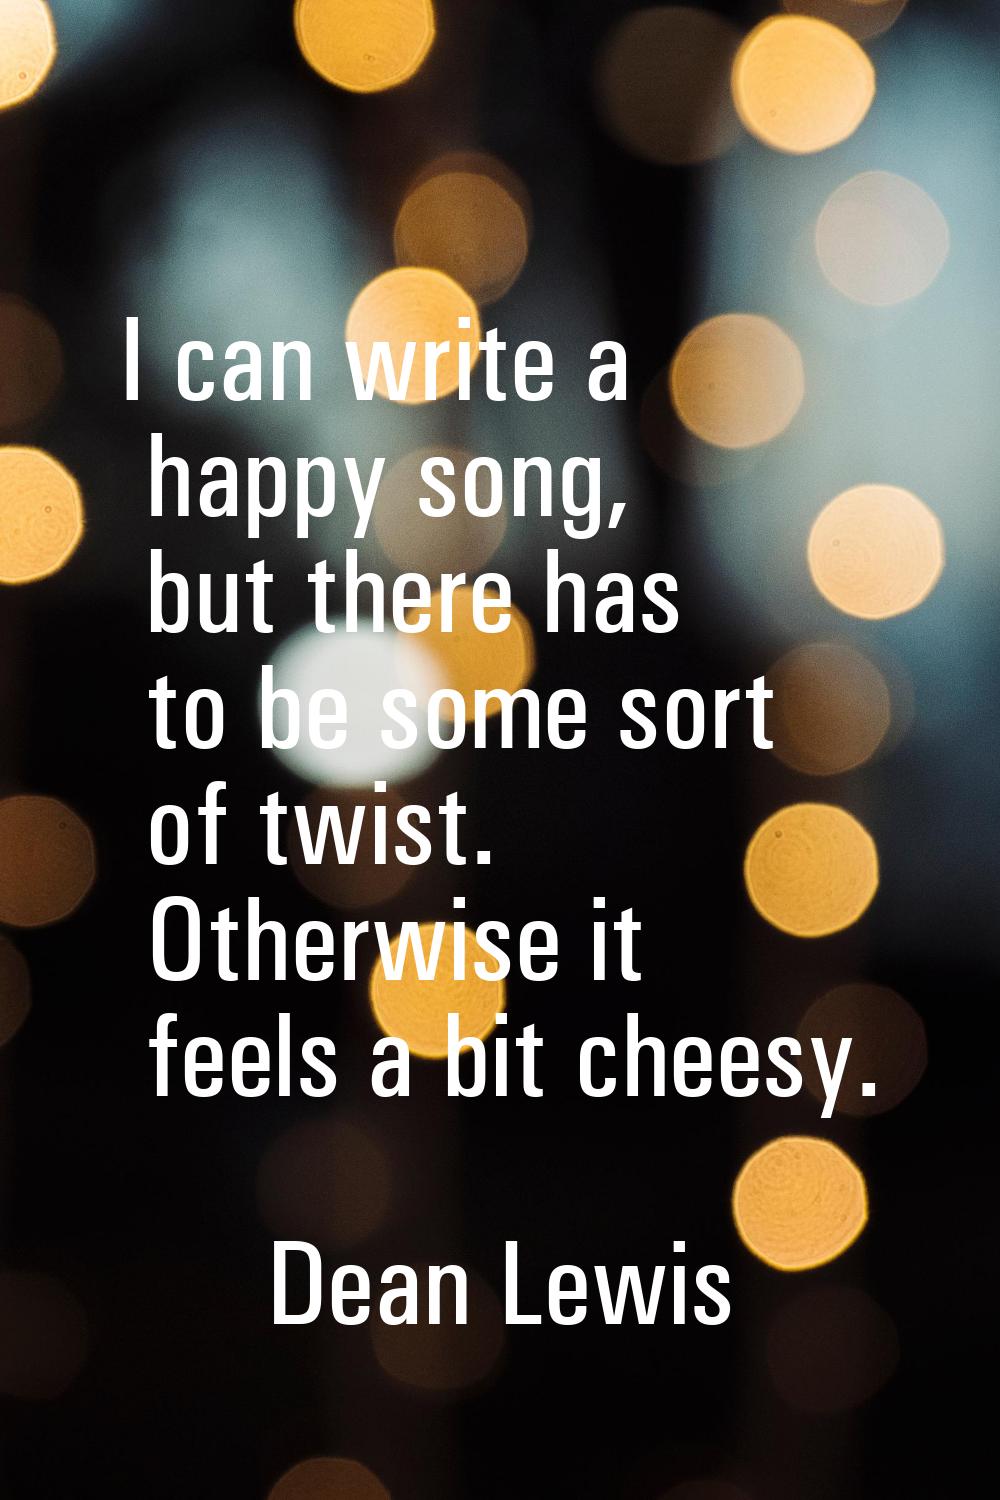 I can write a happy song, but there has to be some sort of twist. Otherwise it feels a bit cheesy.